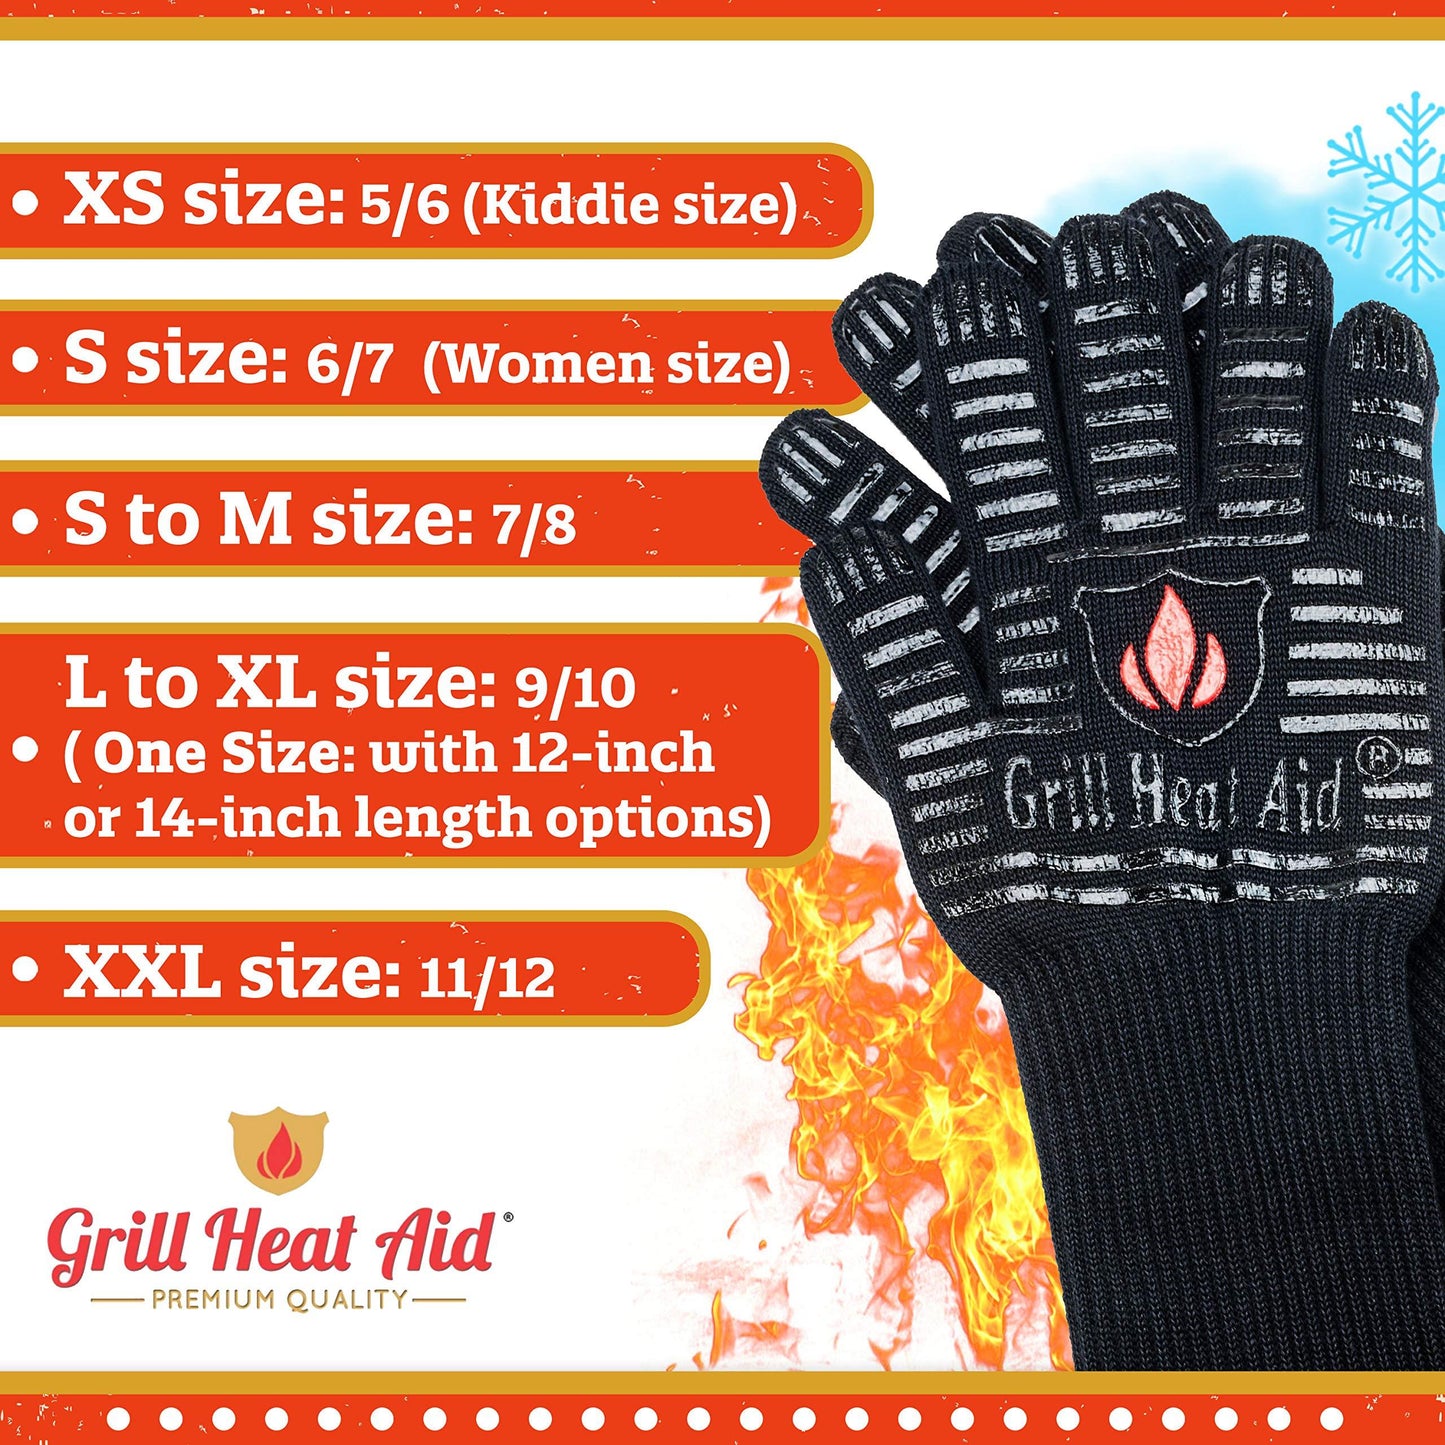 GRILL HEAT AID BBQ Gloves Heat Resistant 1,472℉ Extreme. Dexterity in Kitchen to Handle Cooking Hot Food in Oven, Cast Iron, Pizza, Baking, Barbecue, Smoker & Camping. Fireproof Use for Men & Women - CookCave